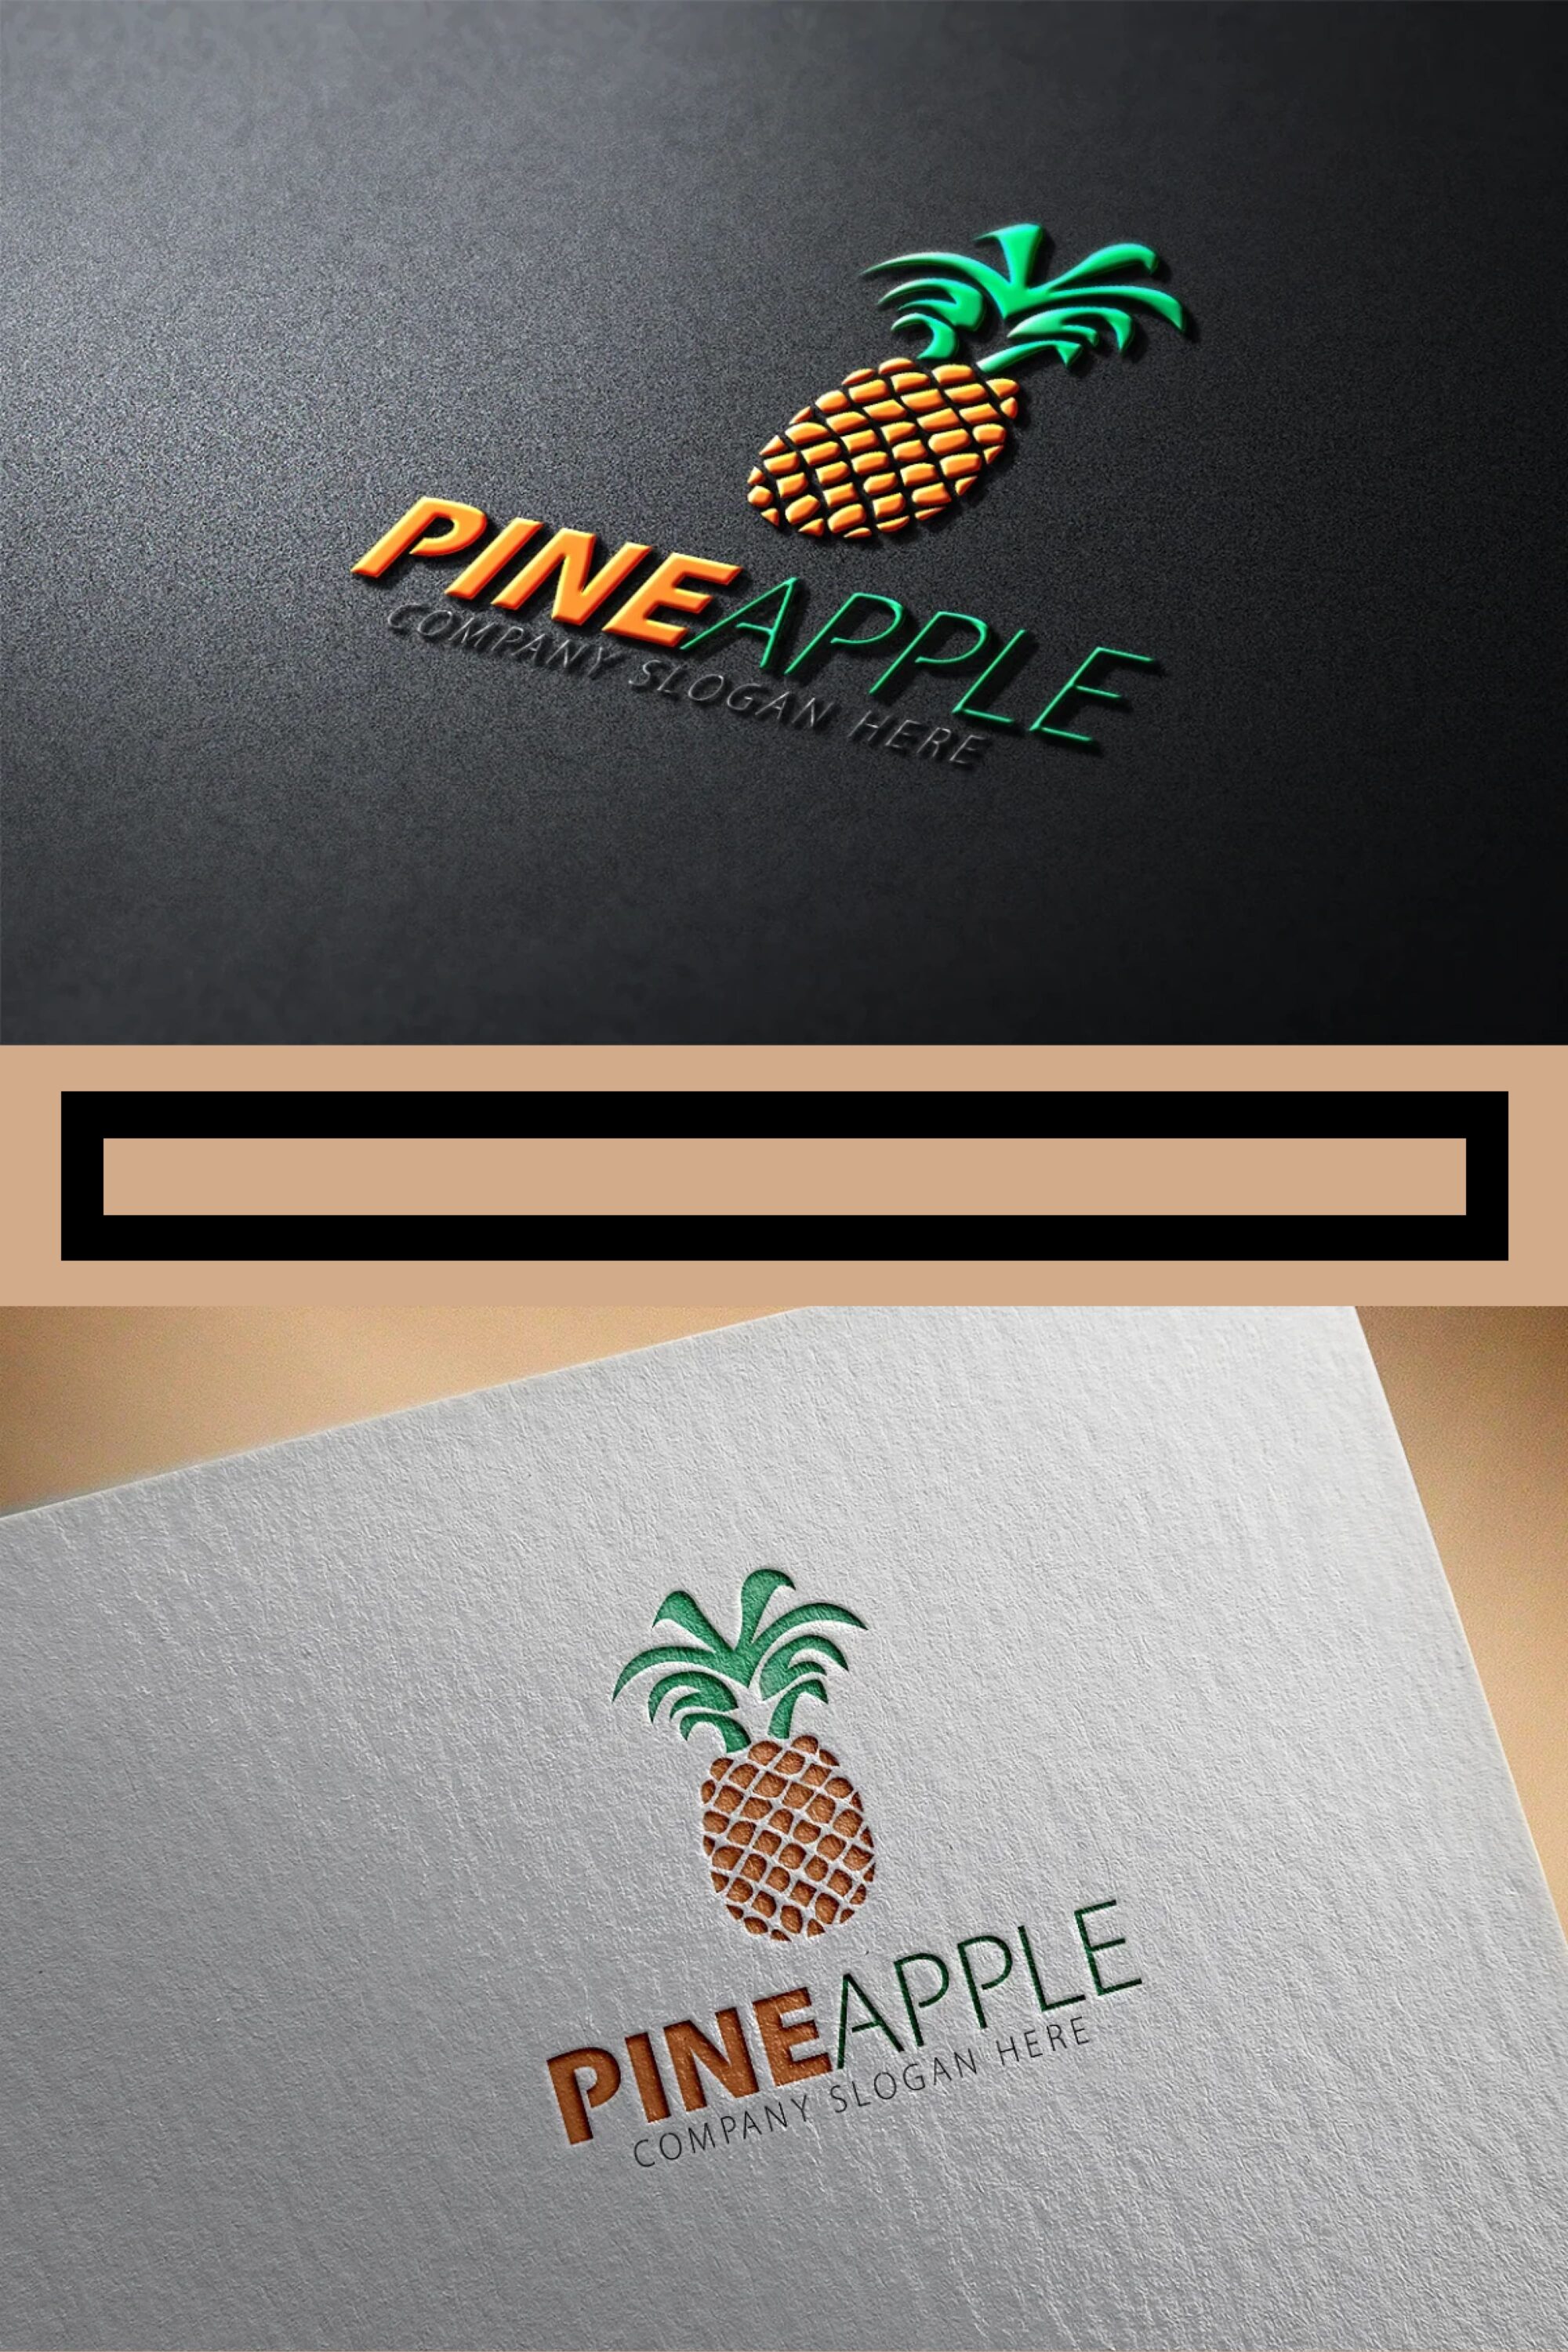 Pineapple logo on the different textures.